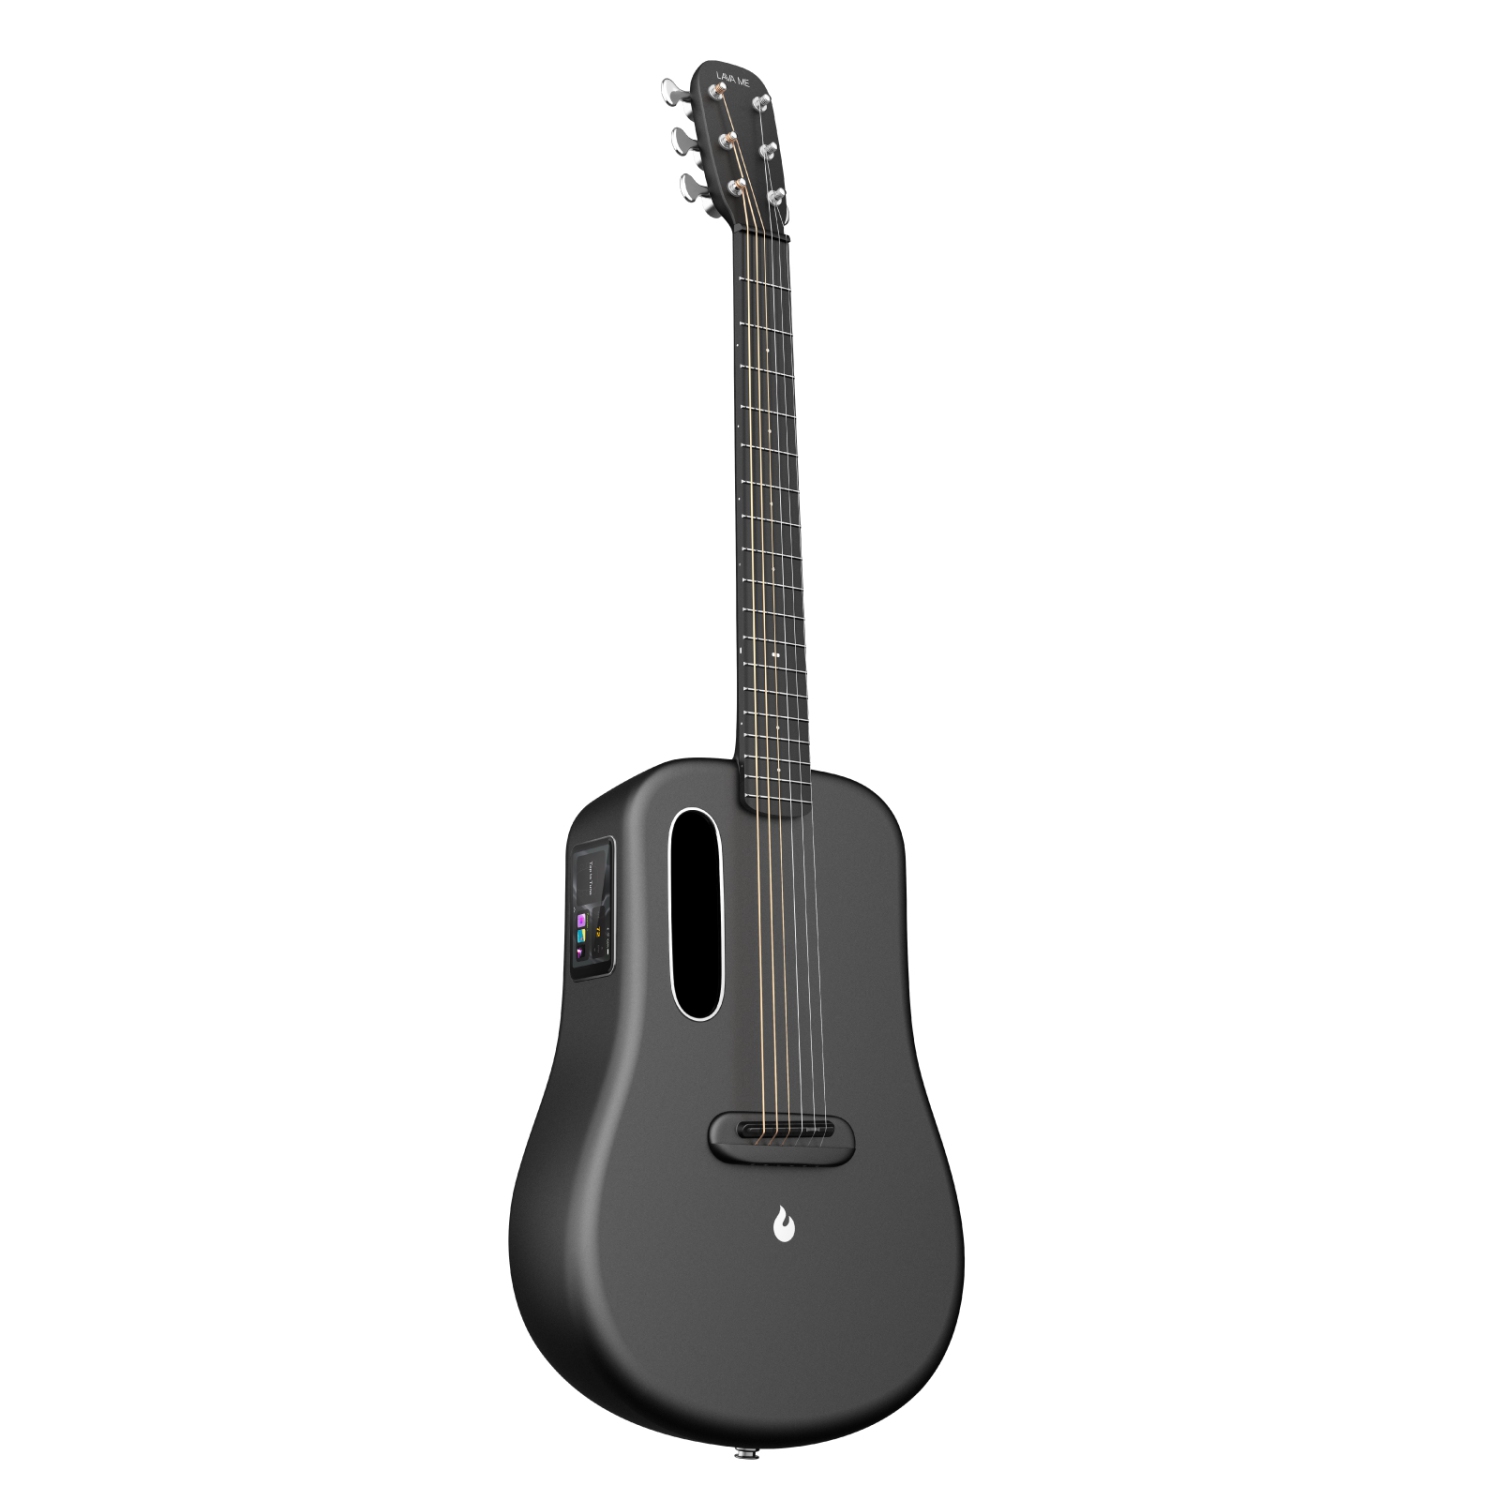 Lava ME 3 | IDEAL Bag | 36” Carbon Fiber Smart Guitar | Built-in Effects, Apps & Amp | Comes with Travel Bag, Charging Cable, Ideal Pick | 2 Colours